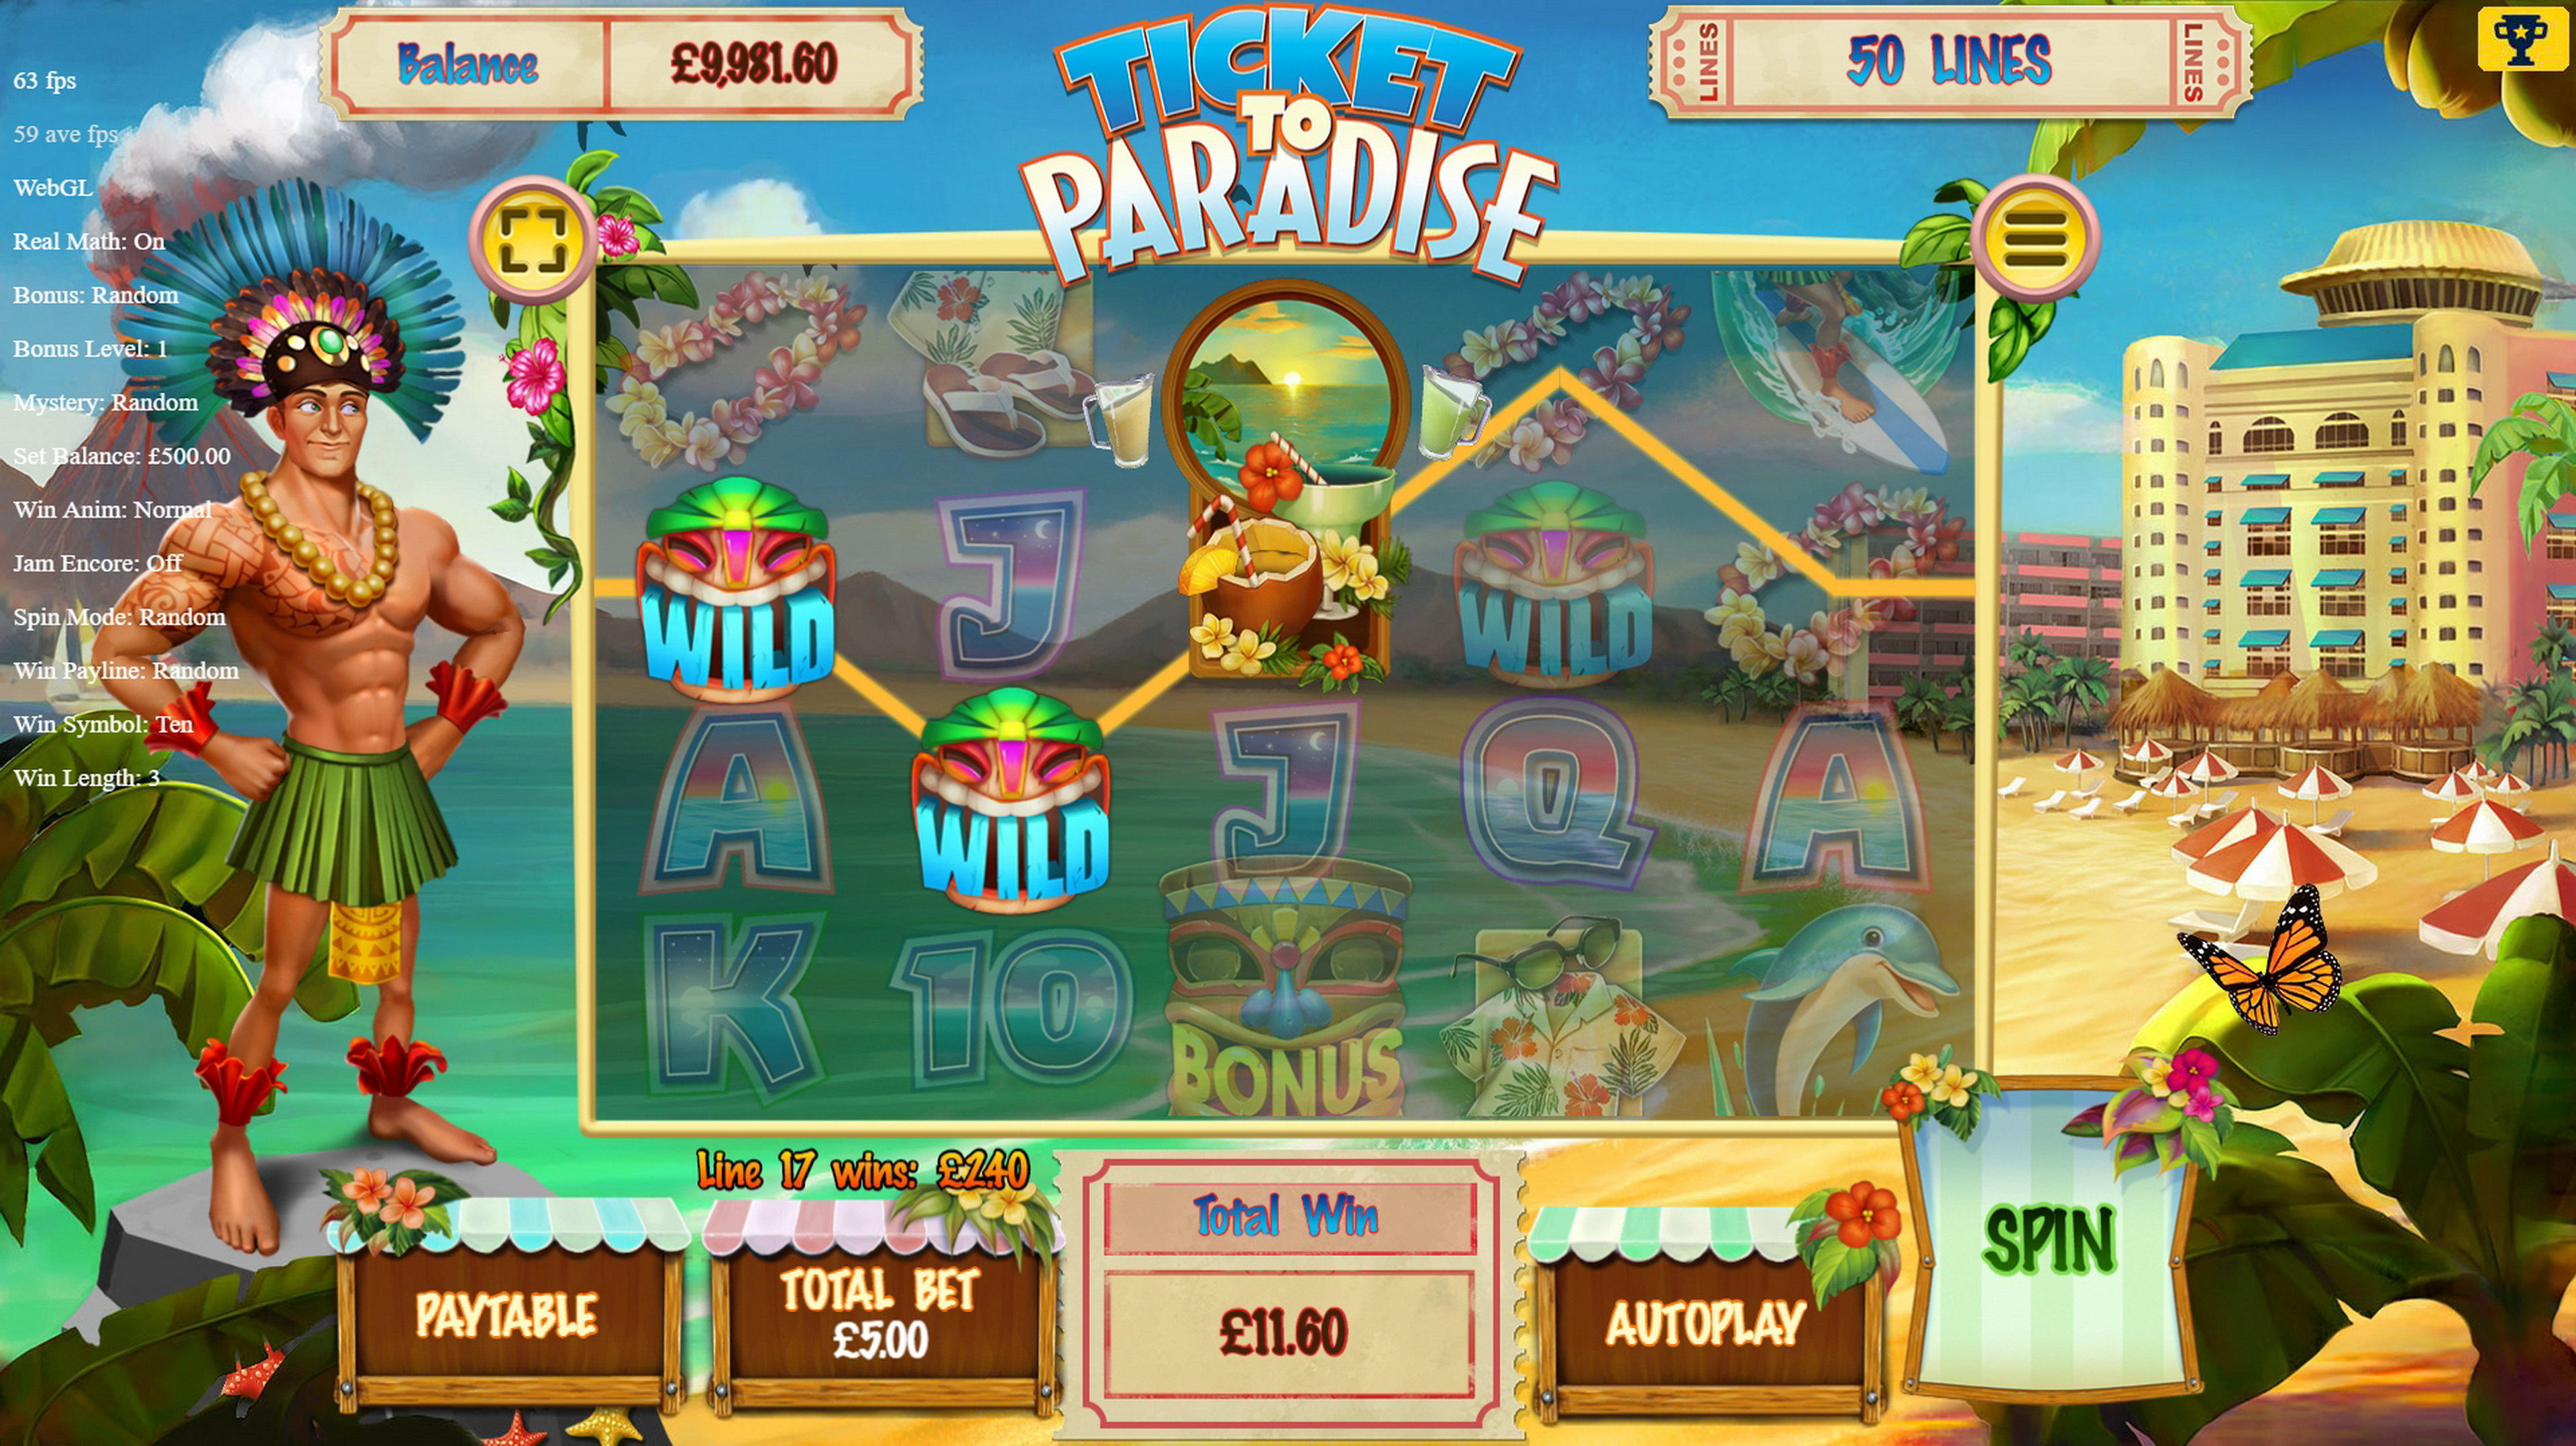 Win Money in Ticket to Paradise Free Slot Game by Asylum Labs